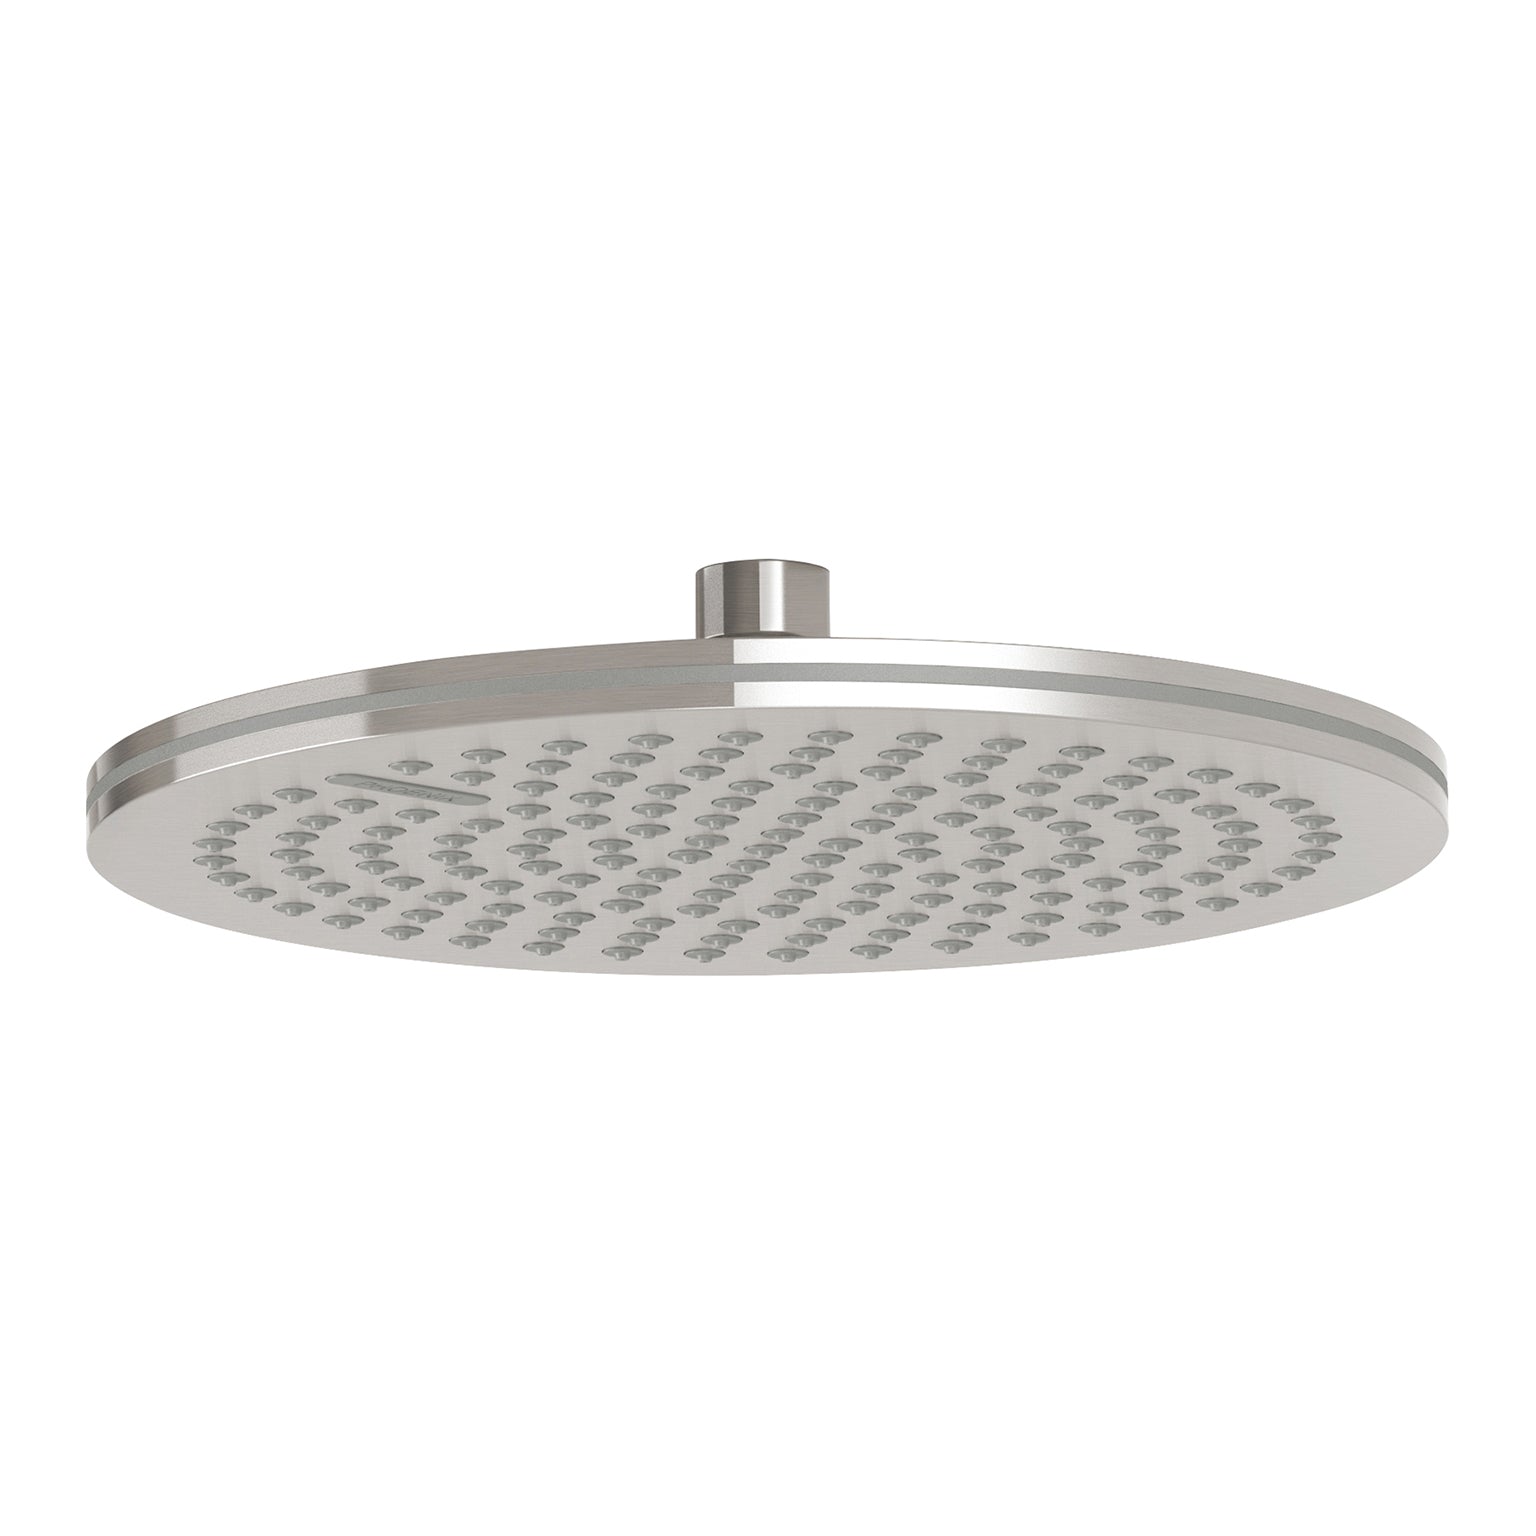 PHOENIX NX QUIL SHOWER ROSE BRUSHED NICKEL 250MM